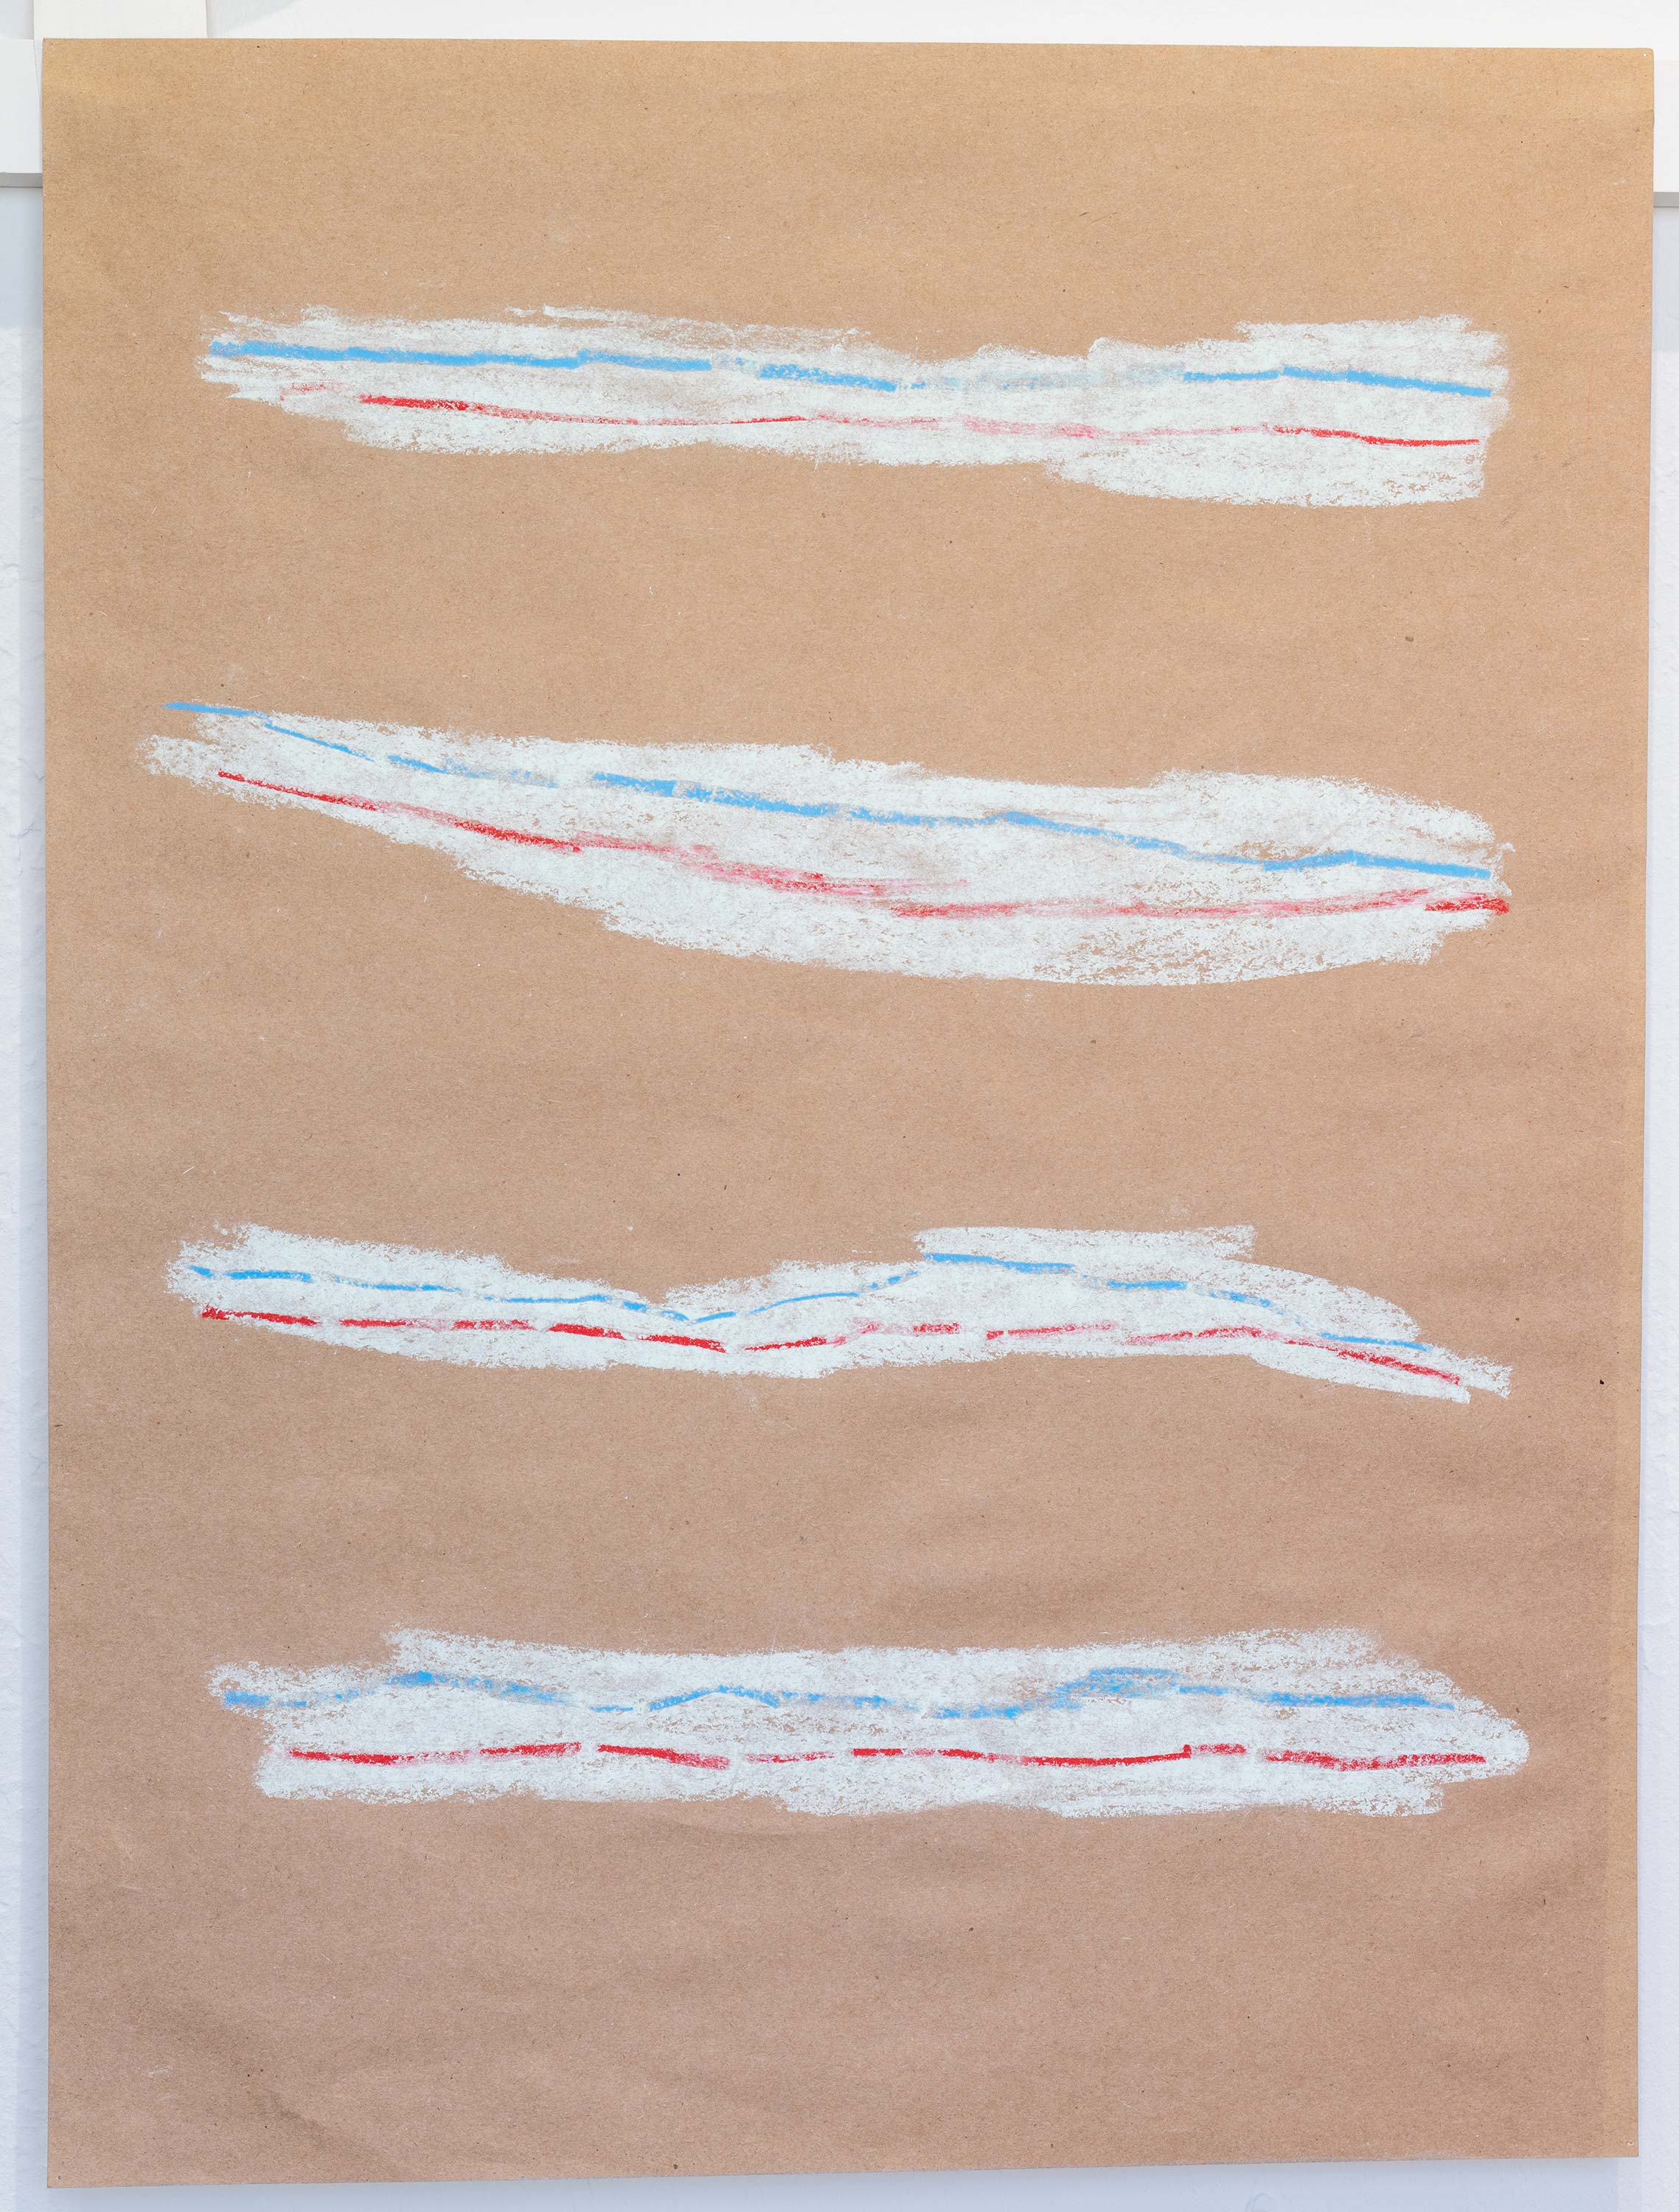 Al Freeman<br>Toothpaste 1<br>2015<br>Graphite and oil pastel on paper<br>18 x 24 inches (46 x 61 cm)